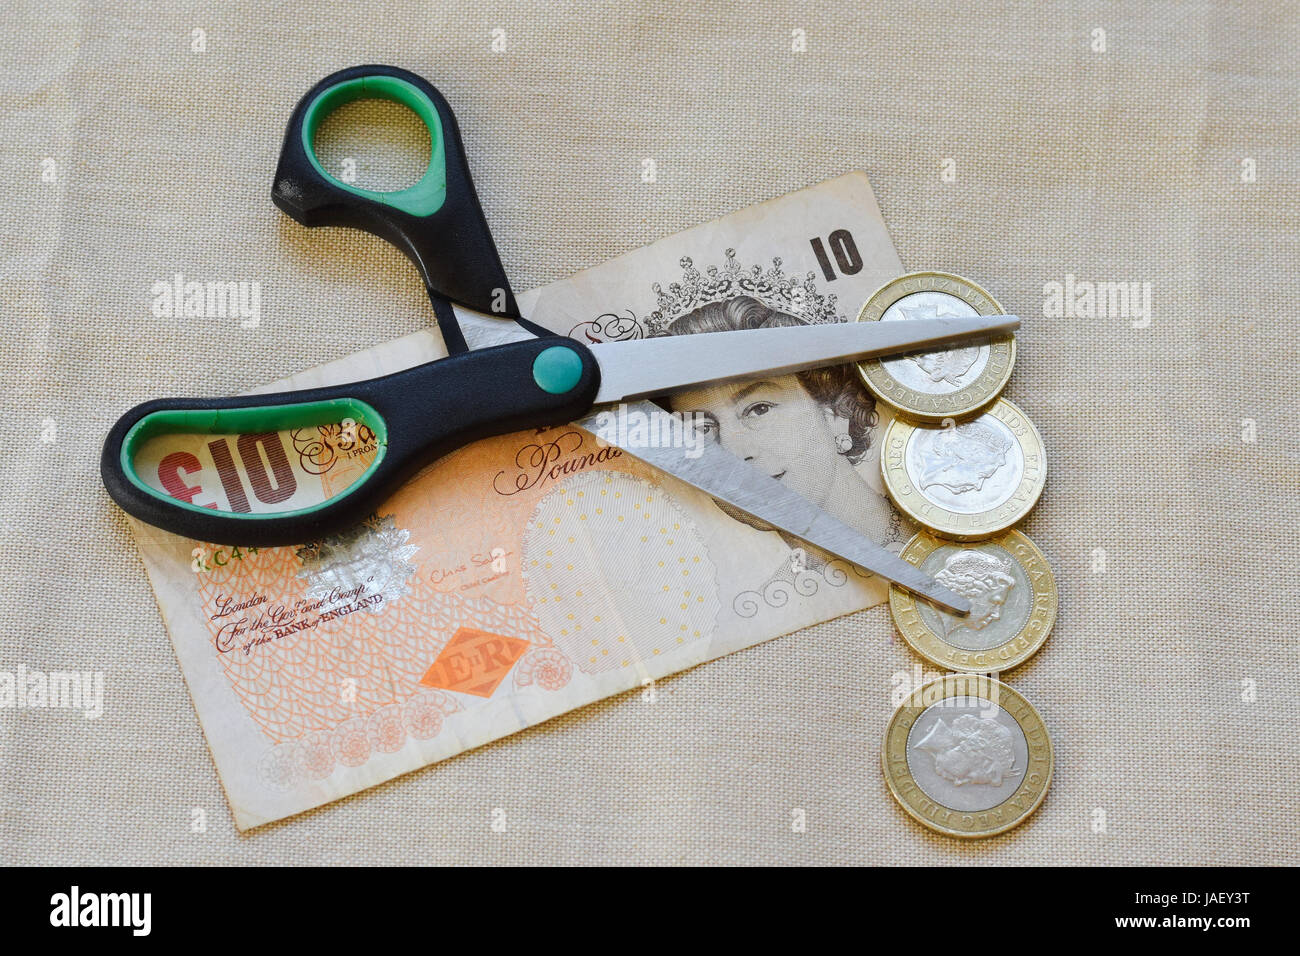 sterling note with open scissors and pound coins on top Stock Photo